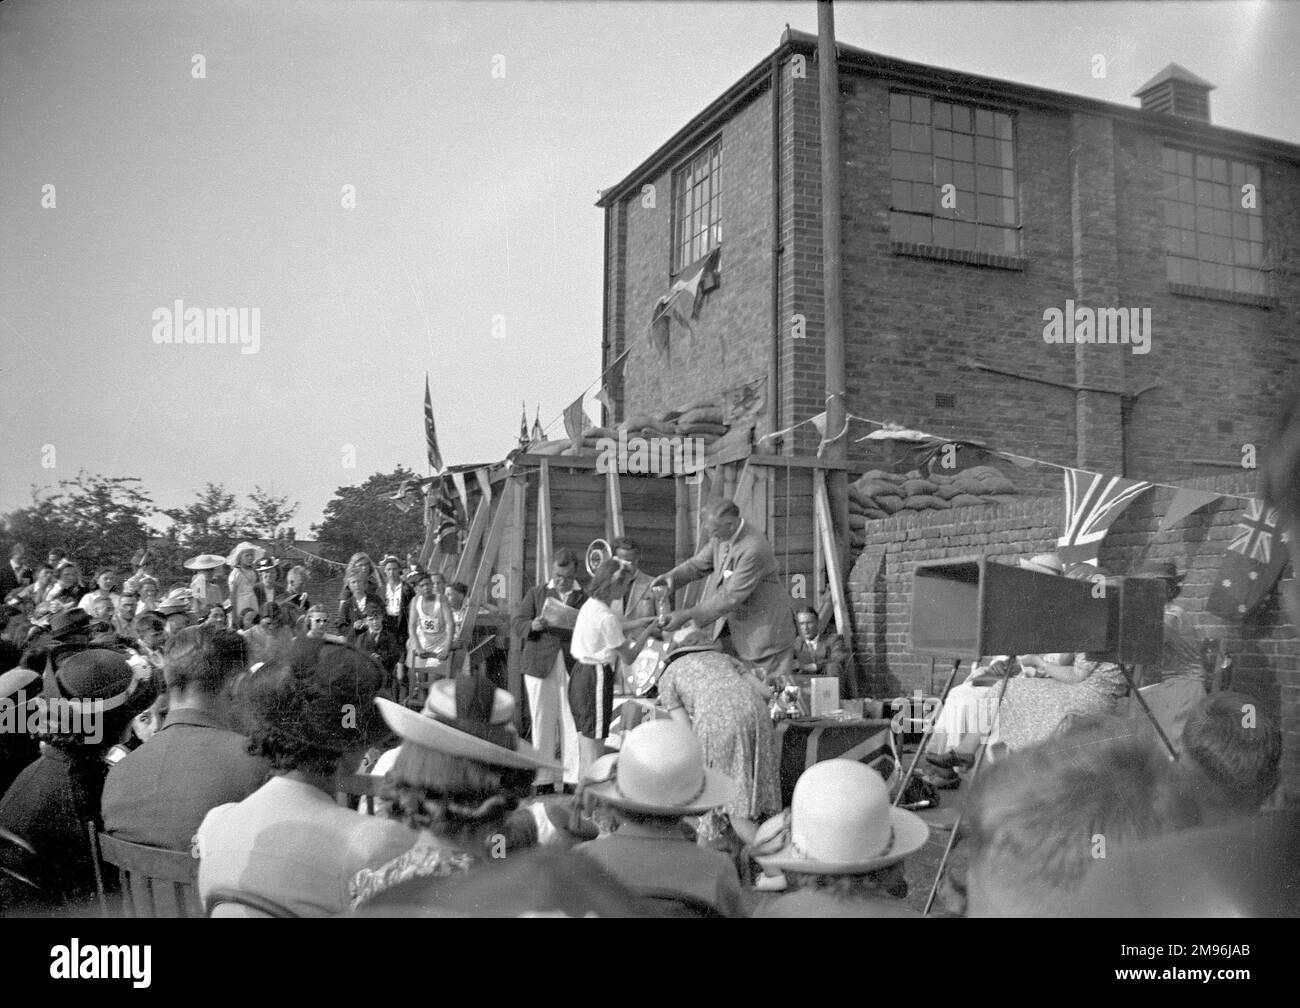 Scene at a sports day prizegiving, with British and Australian flags on display. Stock Photo